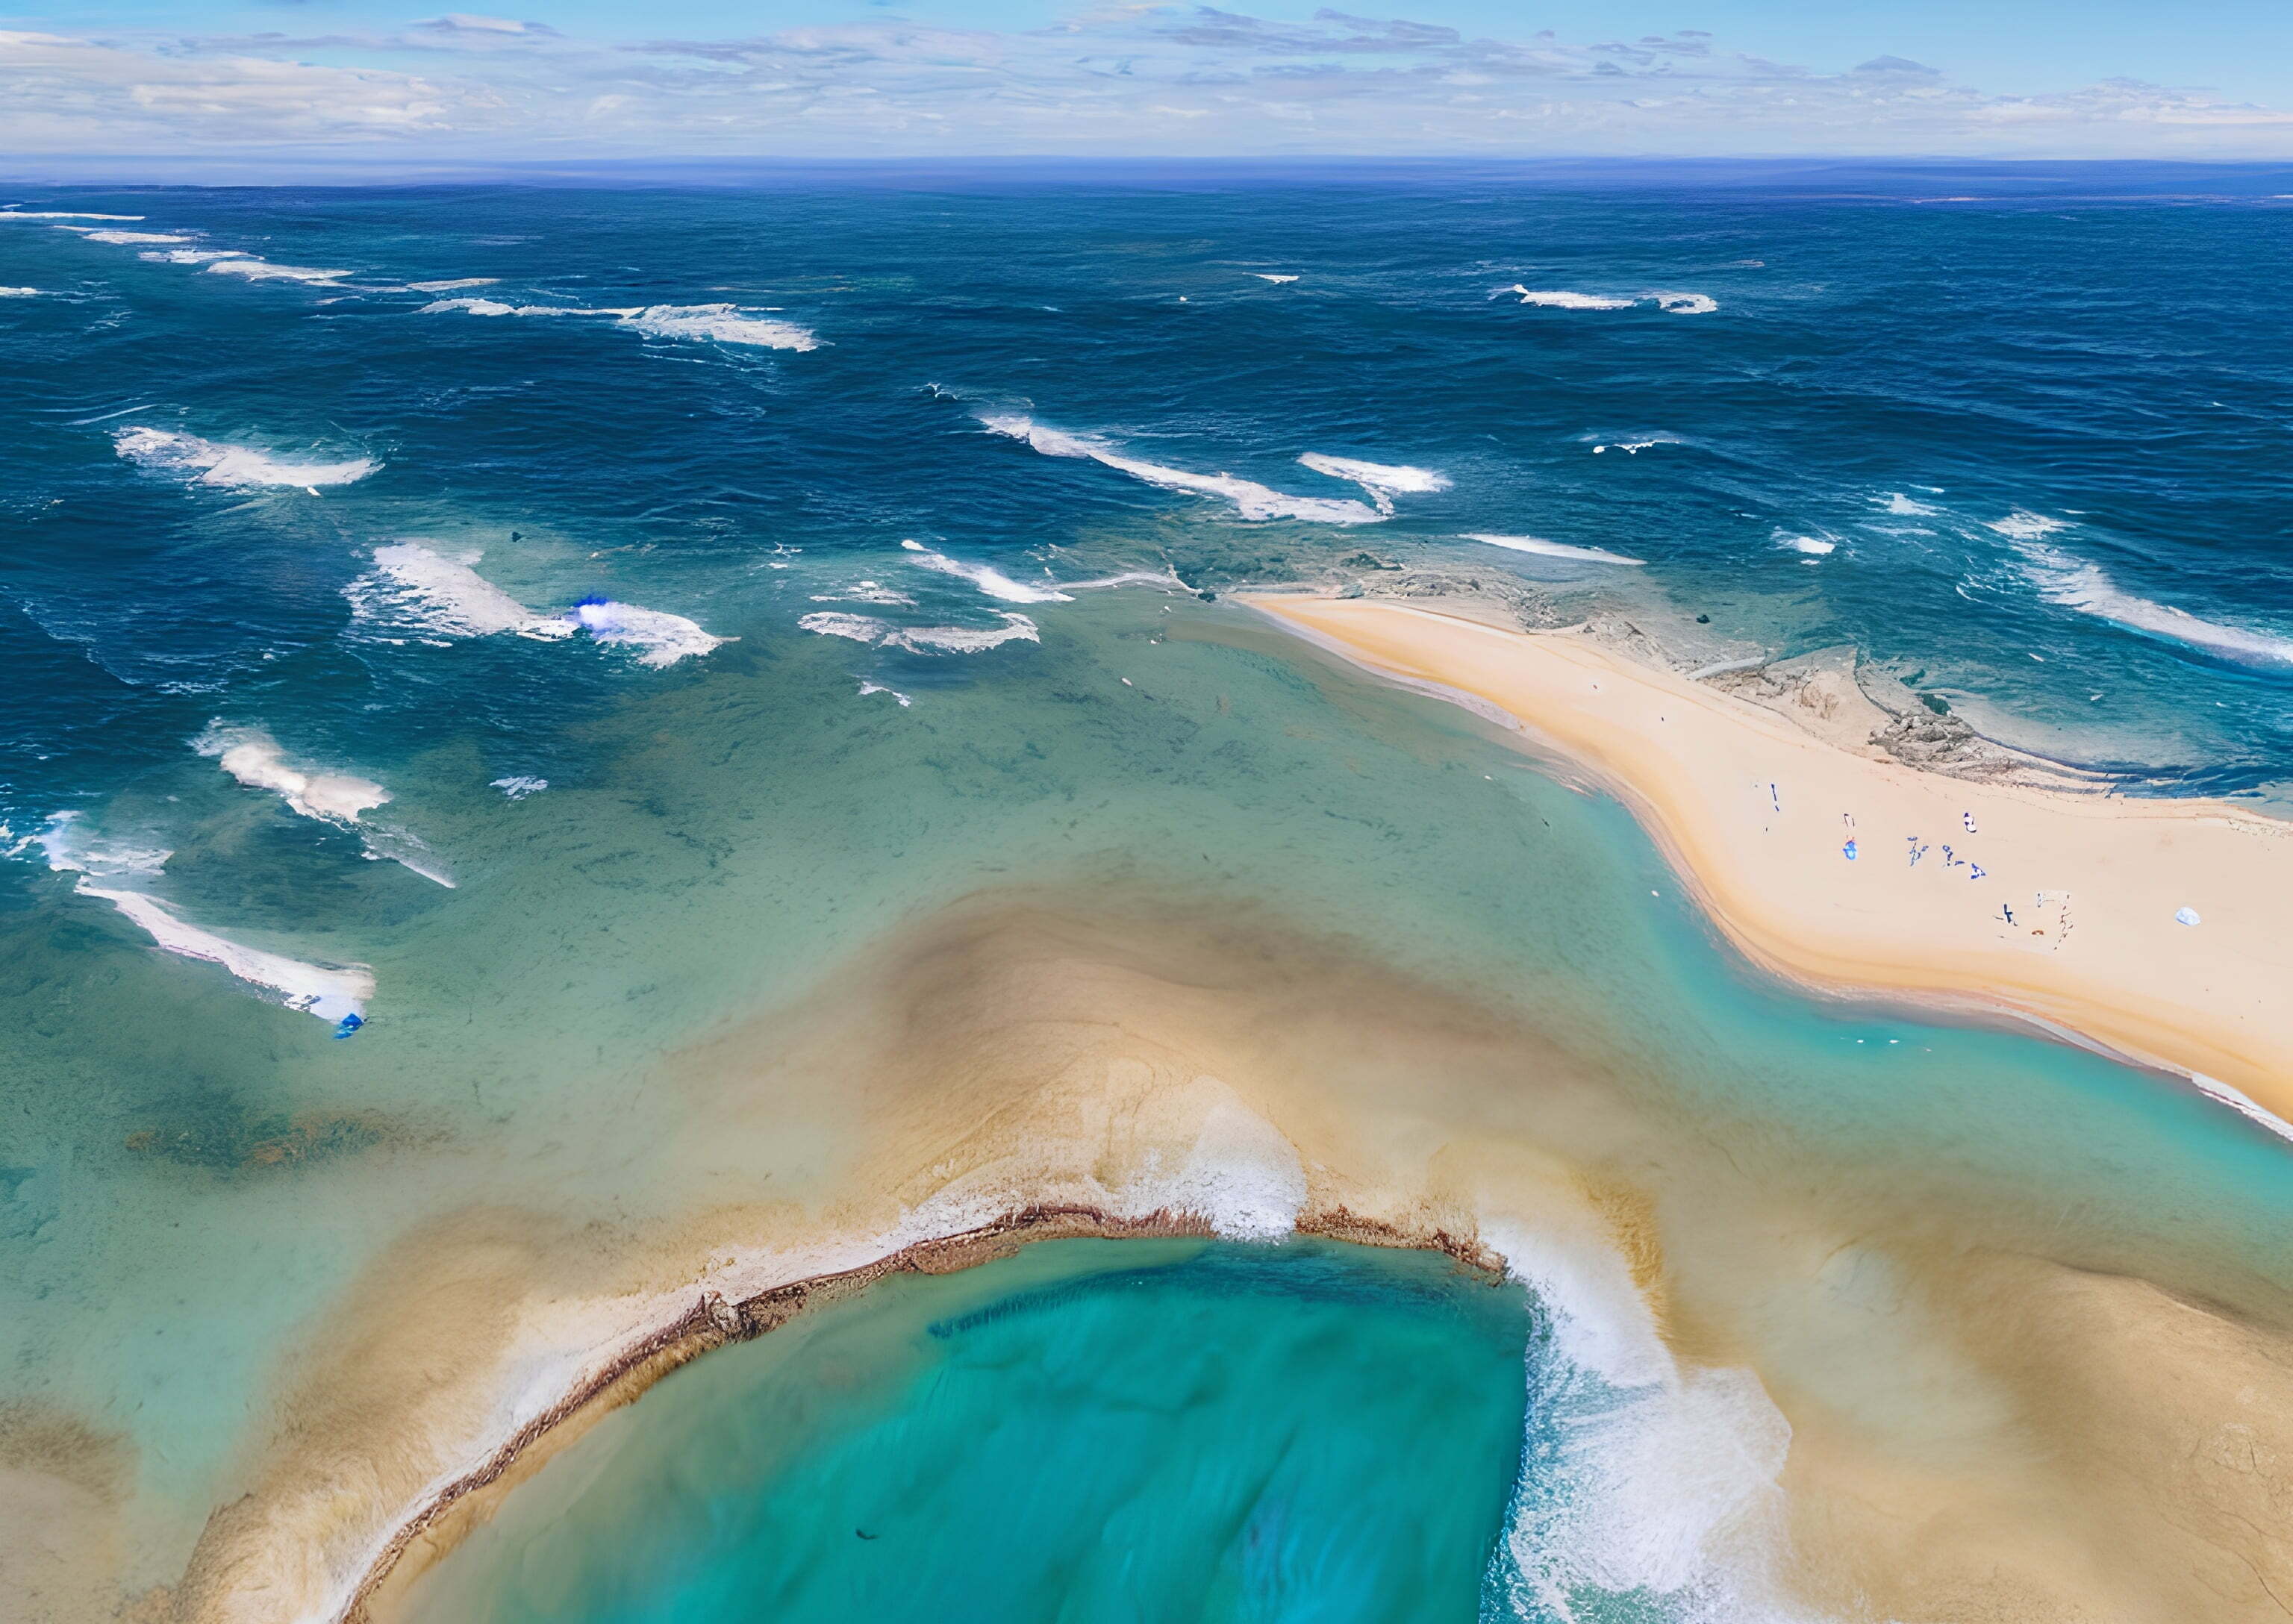 A beautiful image generated using AI with the prompt "A landscape photography of the most beautiful beach in Australia".